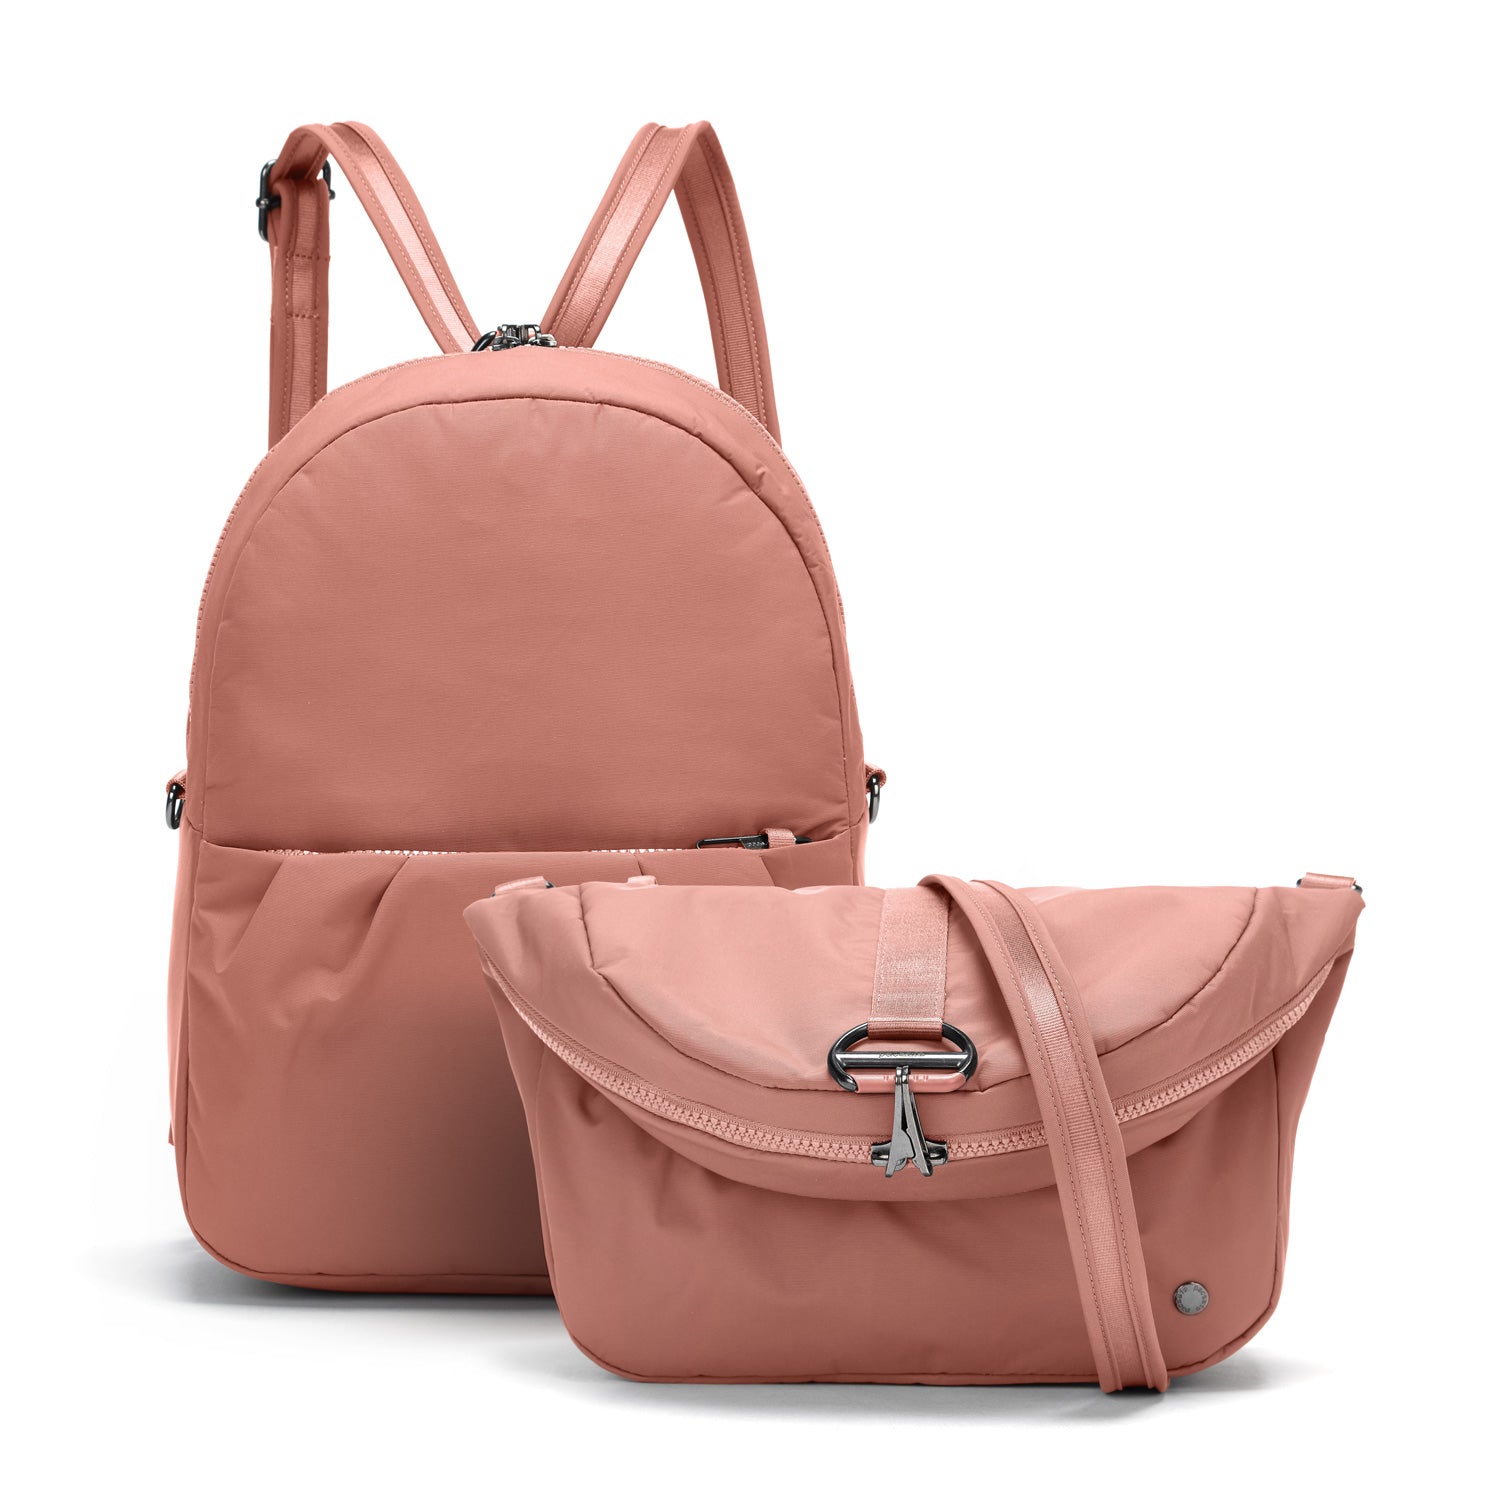 Pacsafe - CX Convertible Backpack - Rose